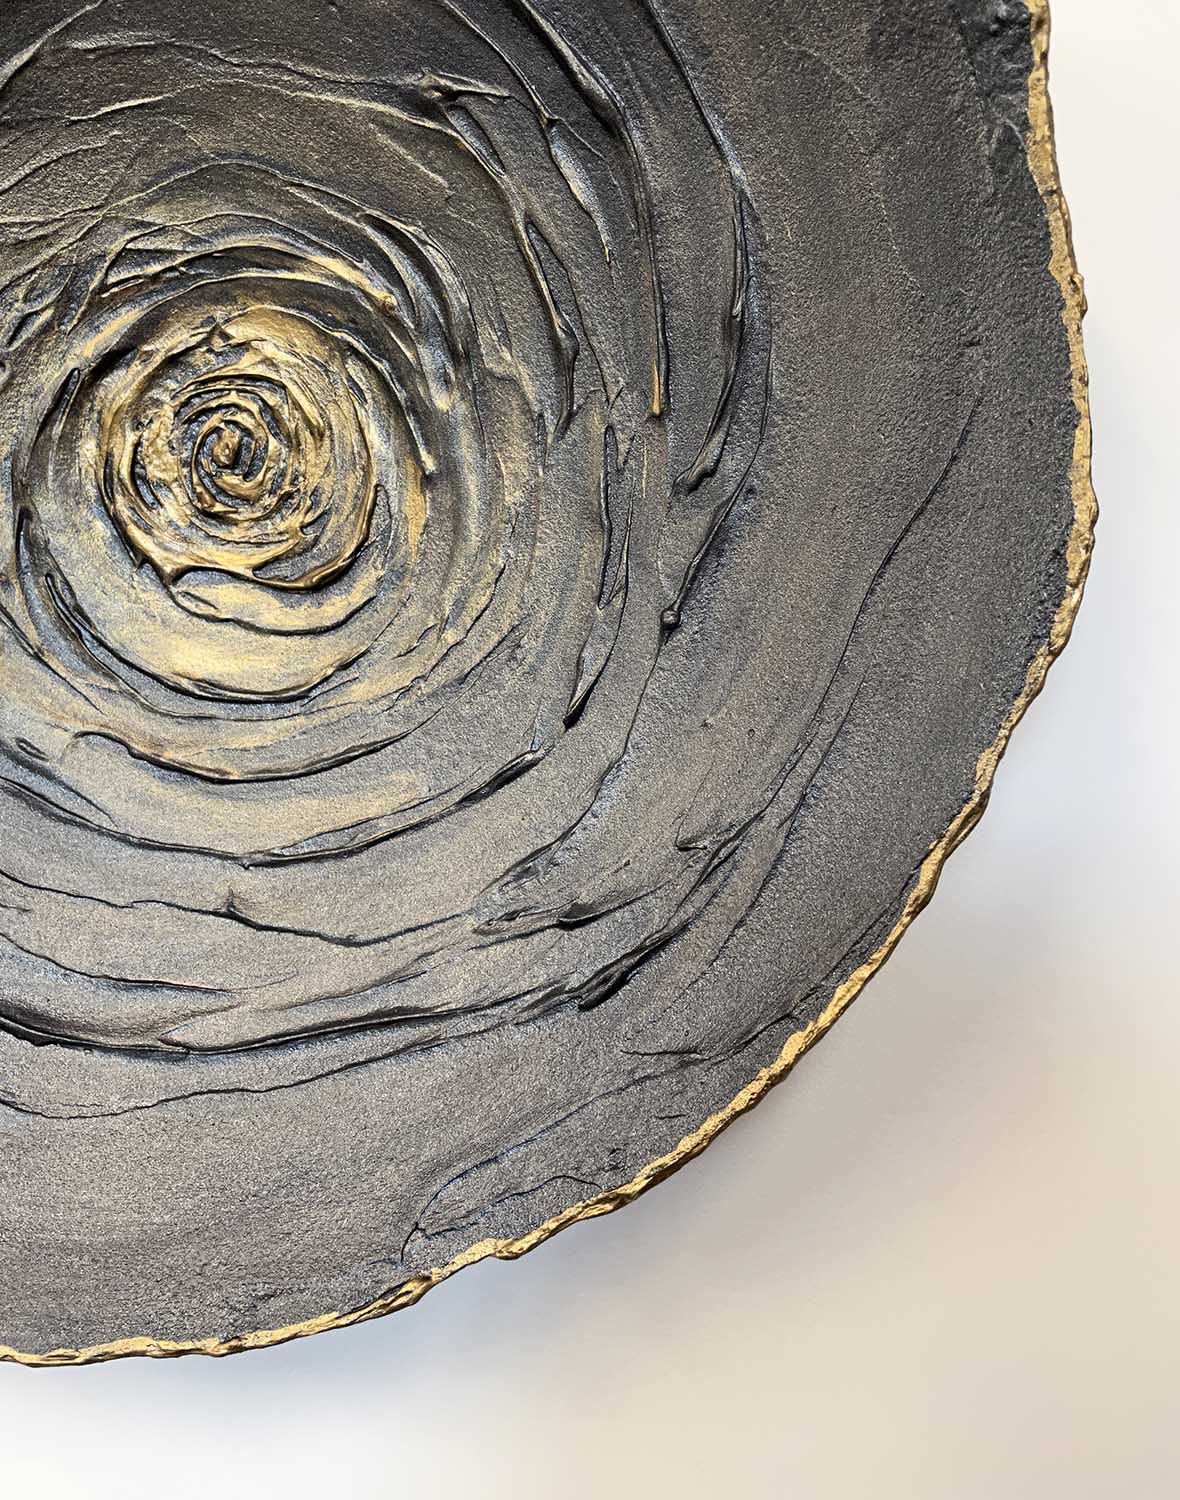 Darkness Eludes Me - Abstract Rose Wall Vessel